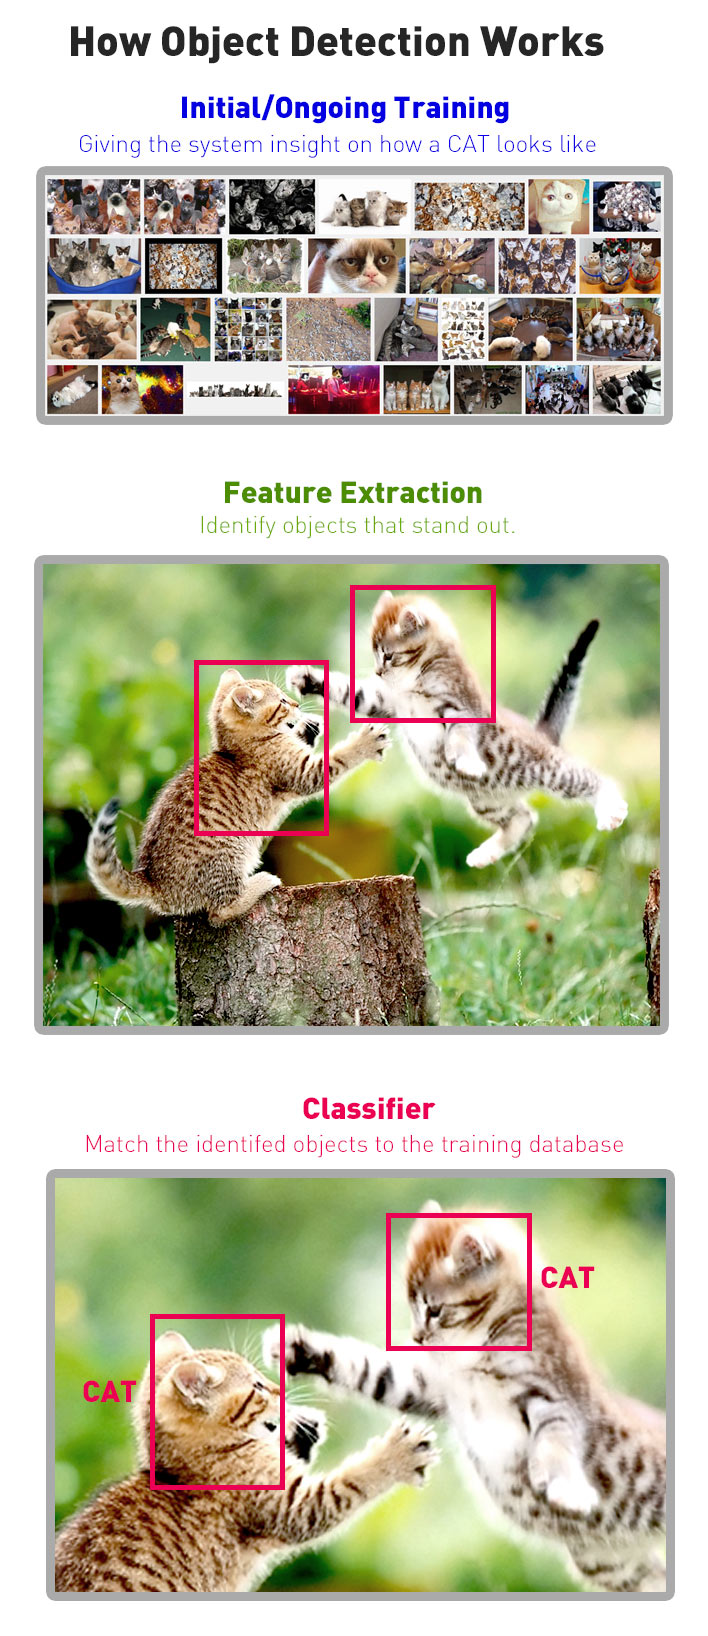 How Object Detection in Images Works